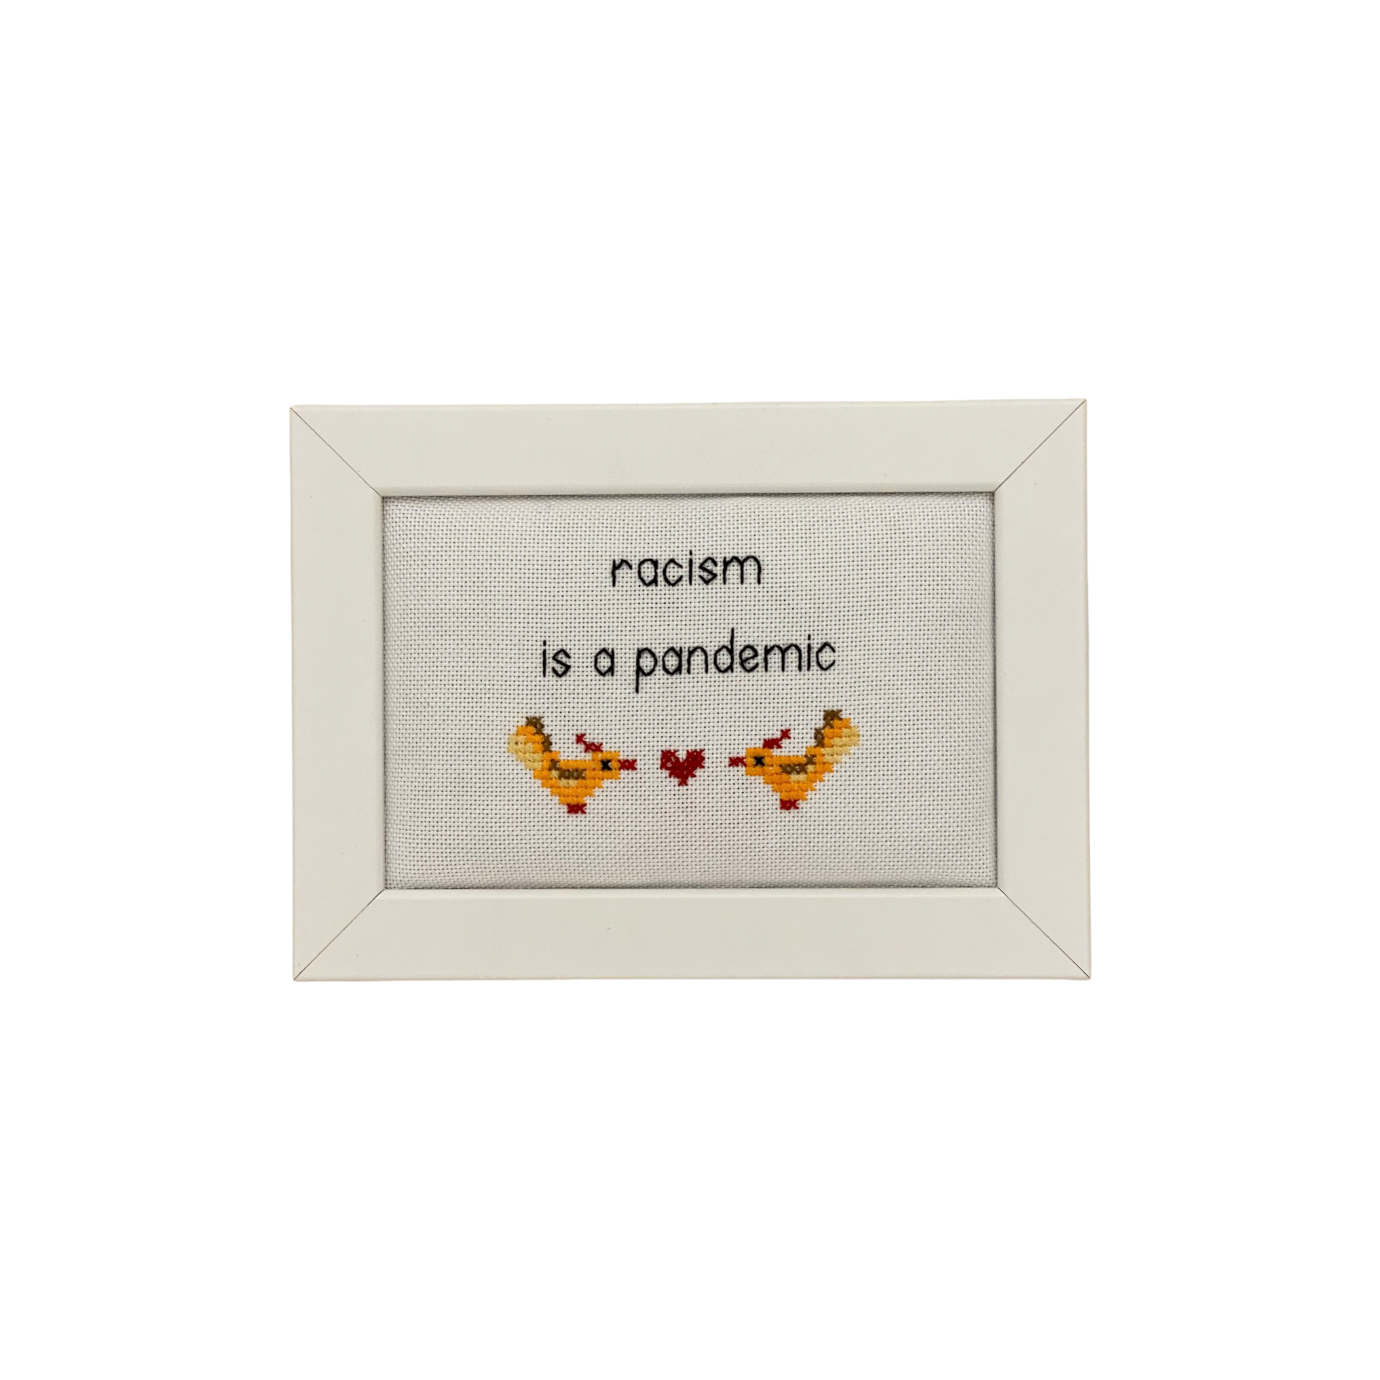 Barbara Guinevra, Racism is a pandemic, 13x18 cm, Embroidery on fabric, framed, 2021